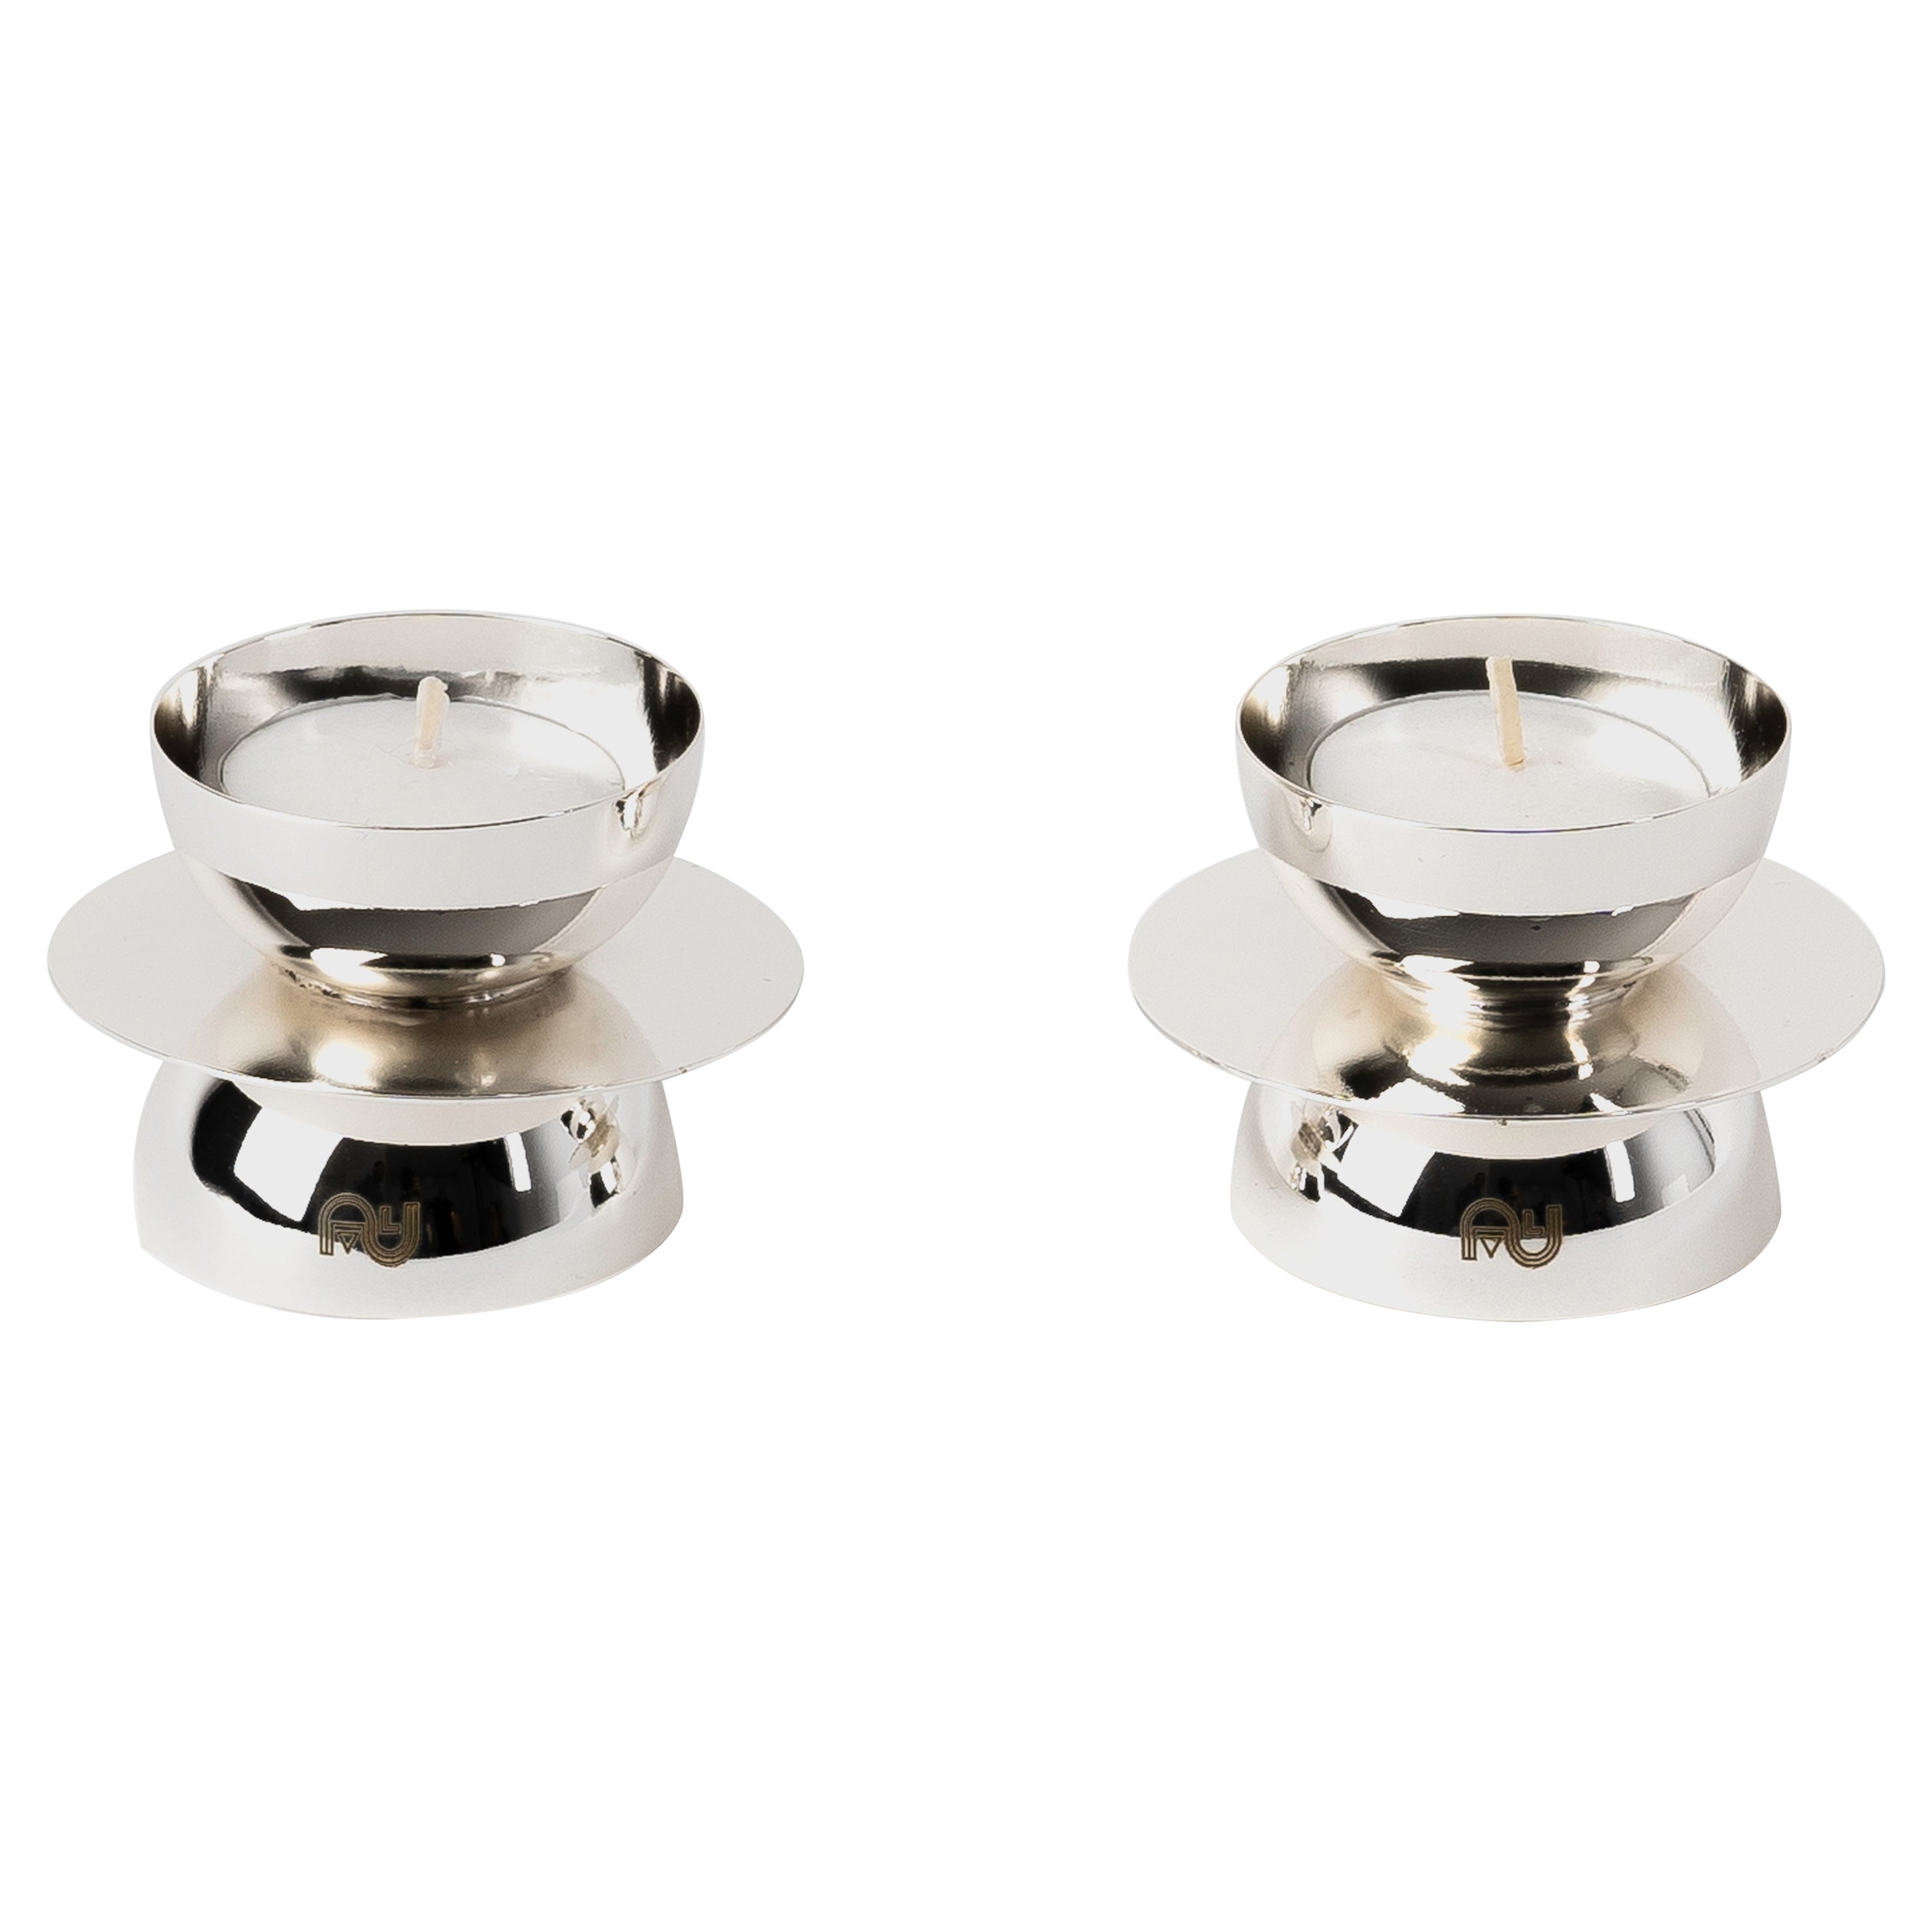 Contemporary Modern, Kubbe Tealight Holders, Nickel Silver Plated, Set of 2 For Sale